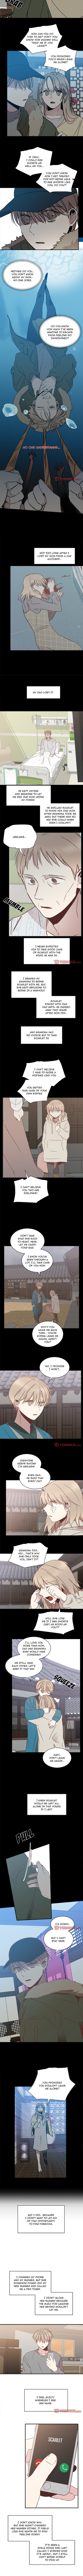 Do You Believe in Ghosts? - Chapter 25 Page 2